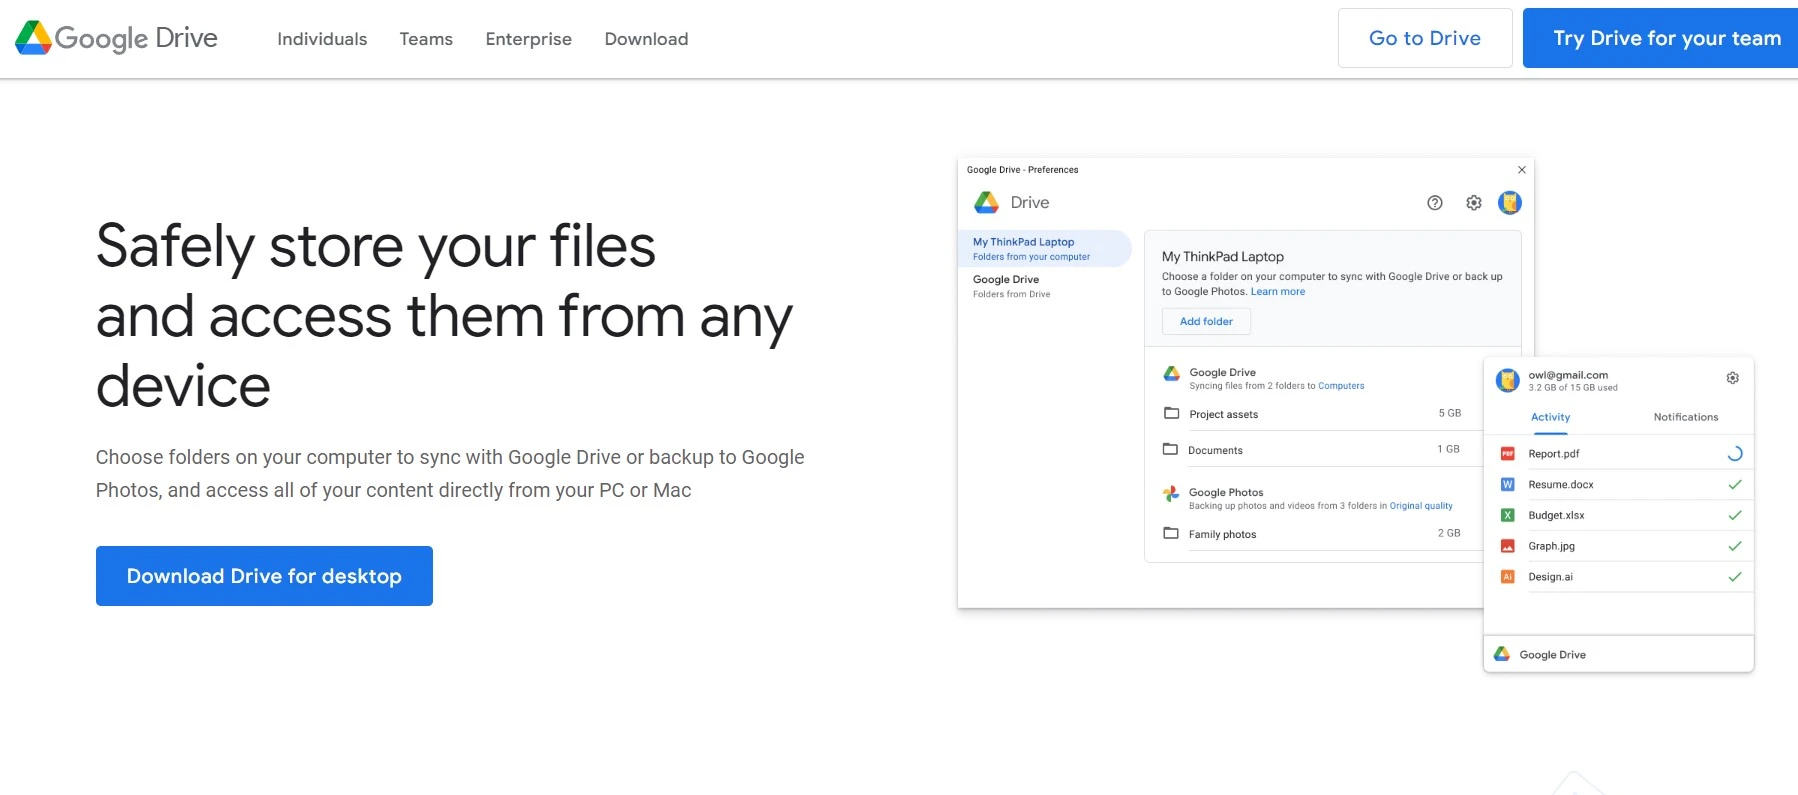 Google Drive is an excellent alternative for iPhone and iPad